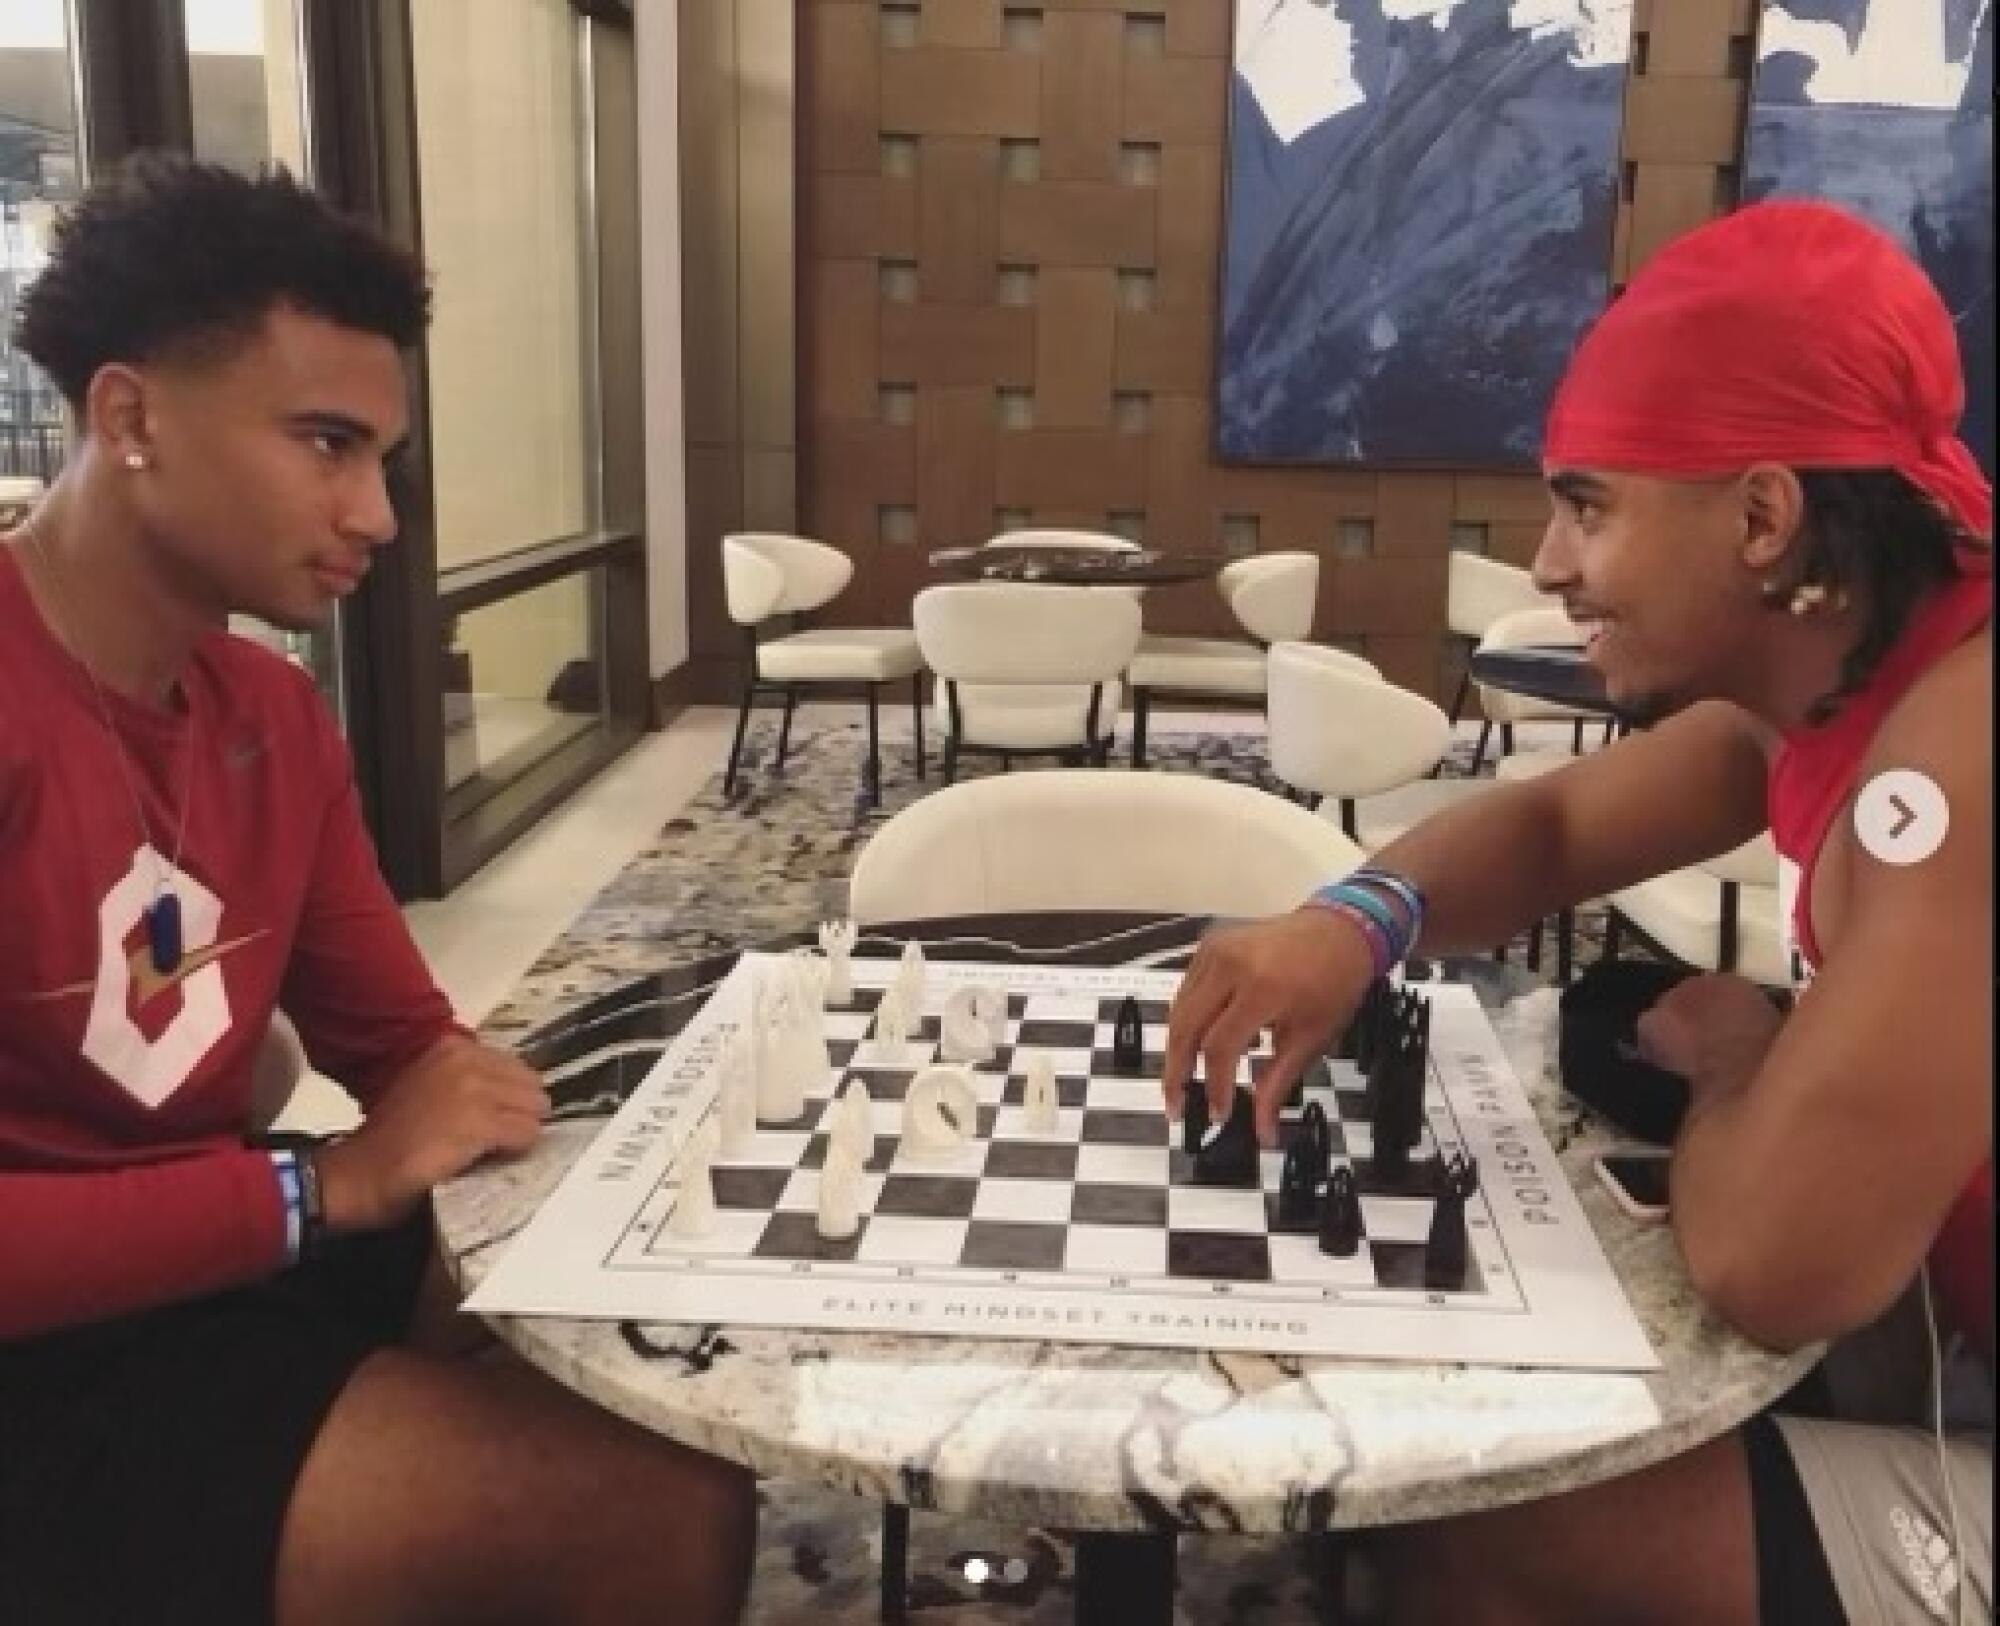 C.J. Stroud, left, current quarterback for the Houston Texans, plays chess with Gee Scott Jr. when they were at Ohio State.